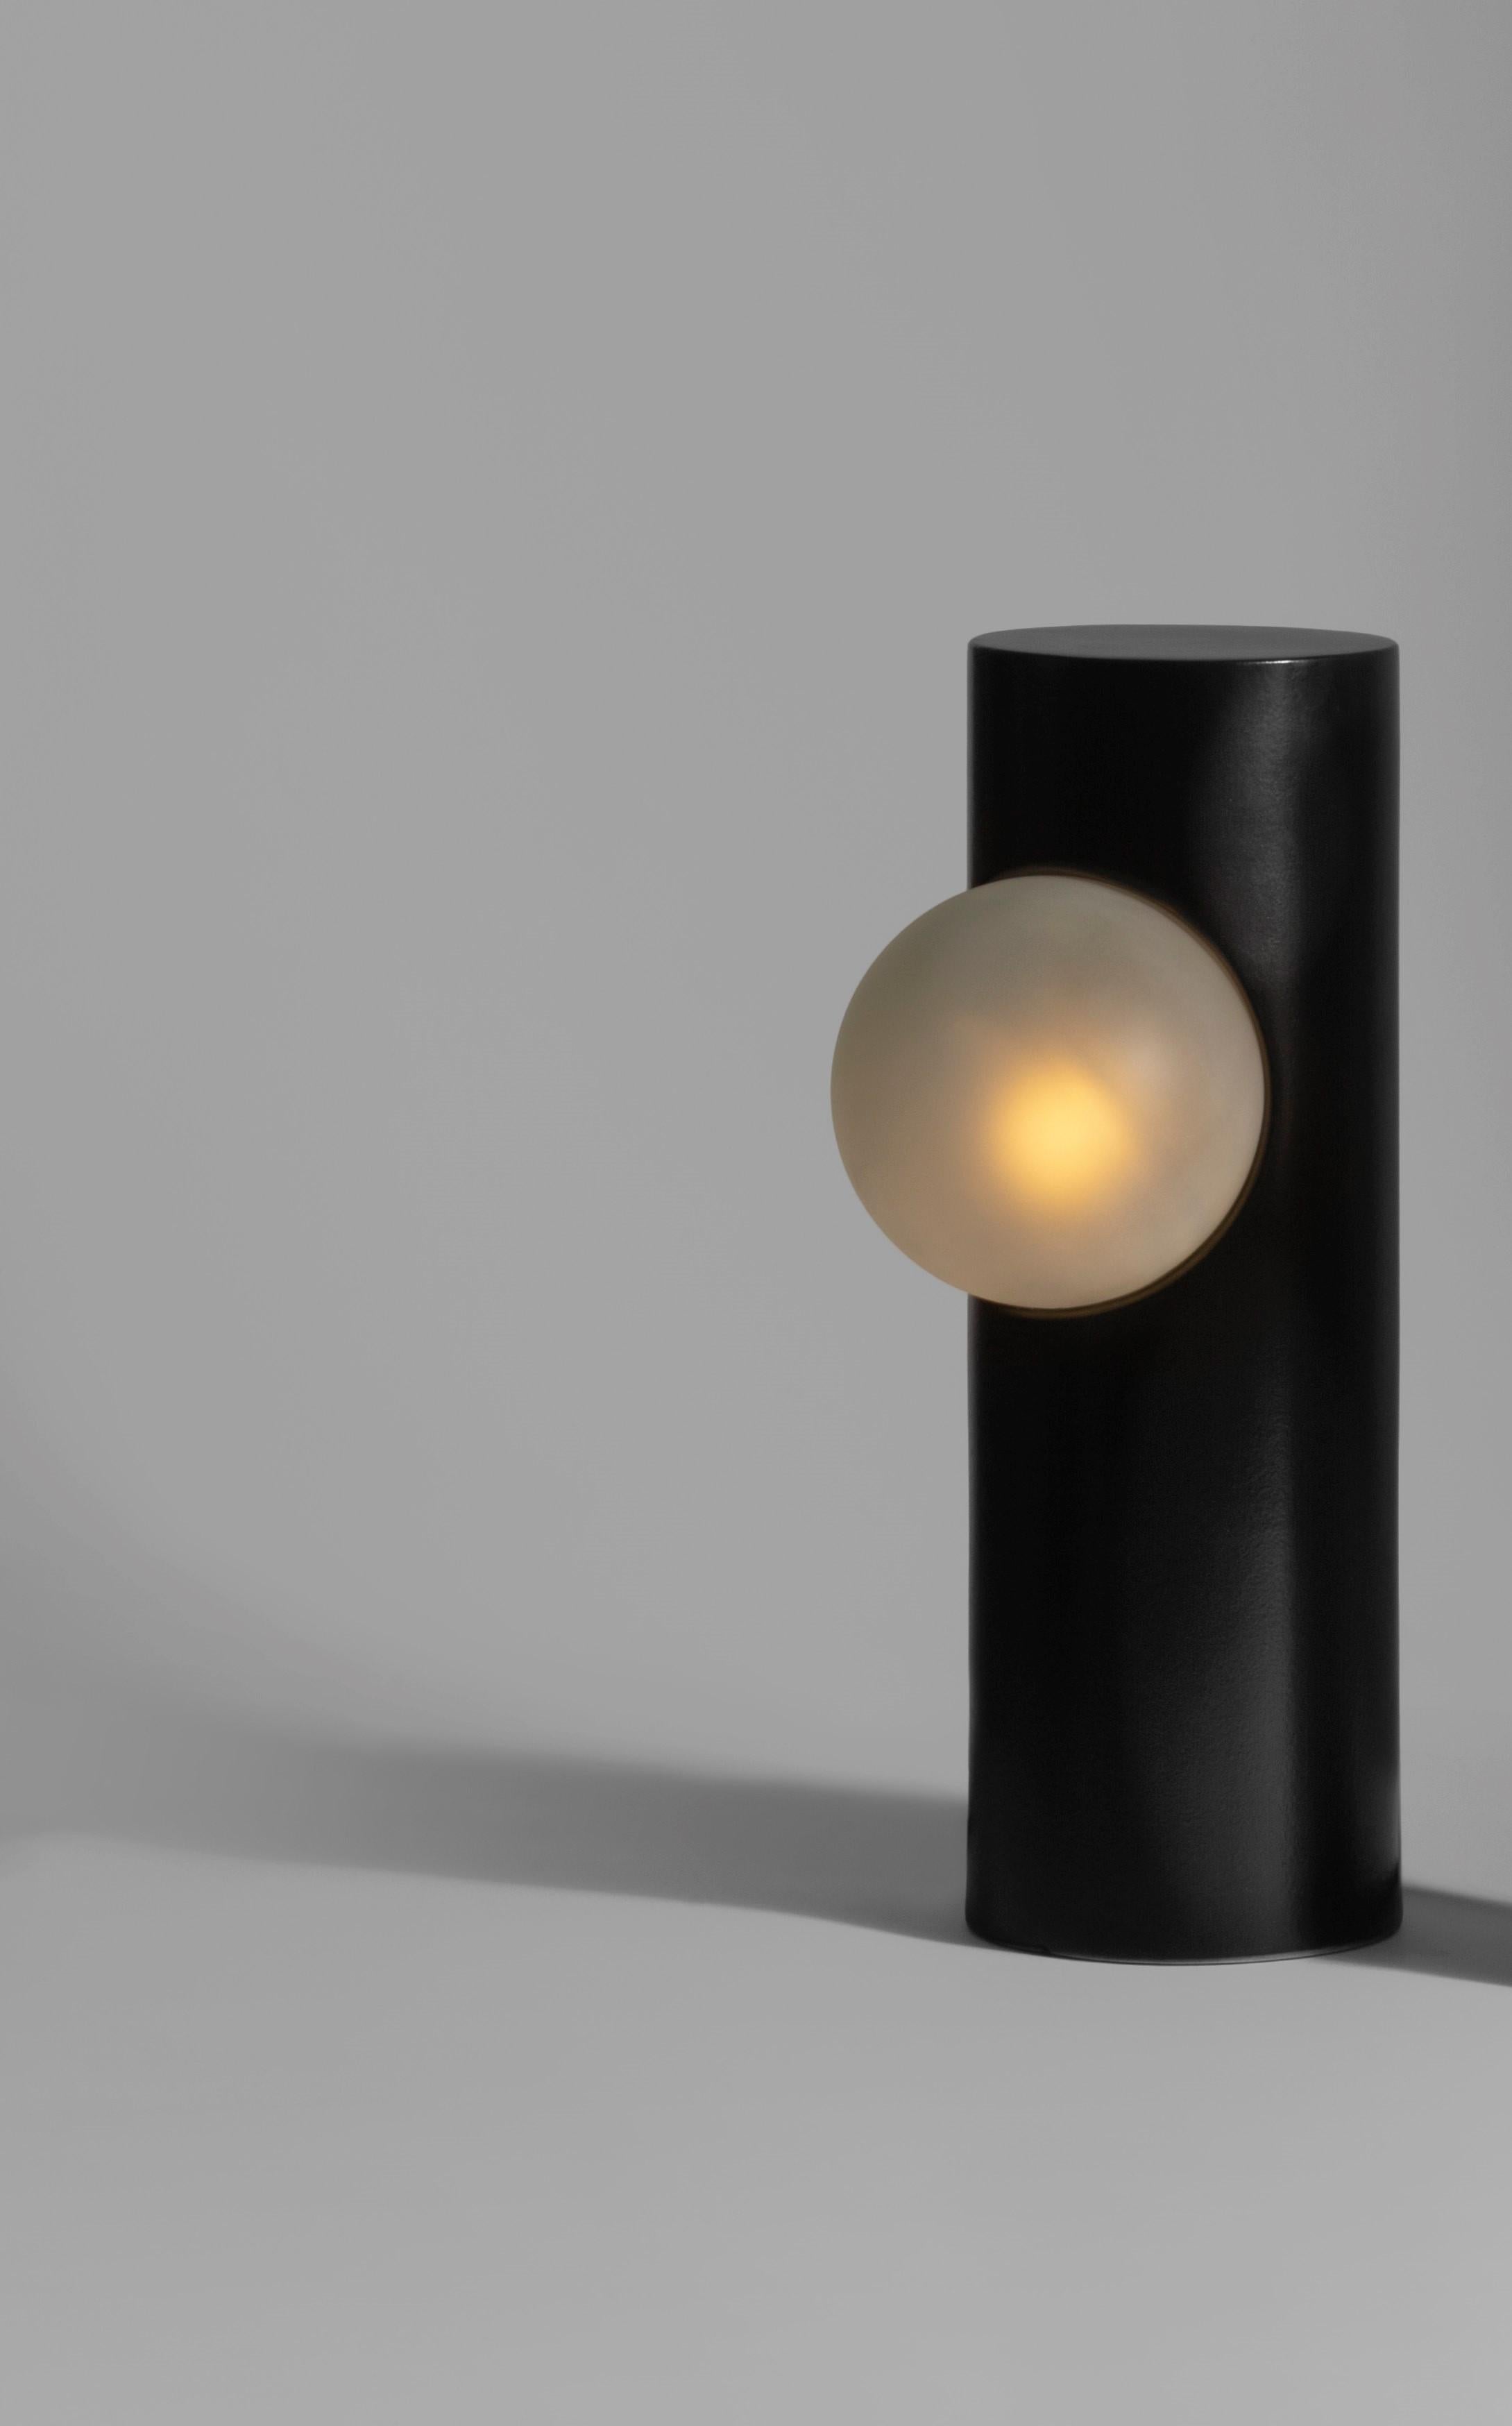 Black Semigloss Post Lamp by Subject Bureaux
DImensions: ? 12.7 x H 38 cm
Materials: Handmade Slip Cast Stoneware, Glass.

The Post Lamp was derived from the exercise of consistently being aware of ones environment. By being curious of the